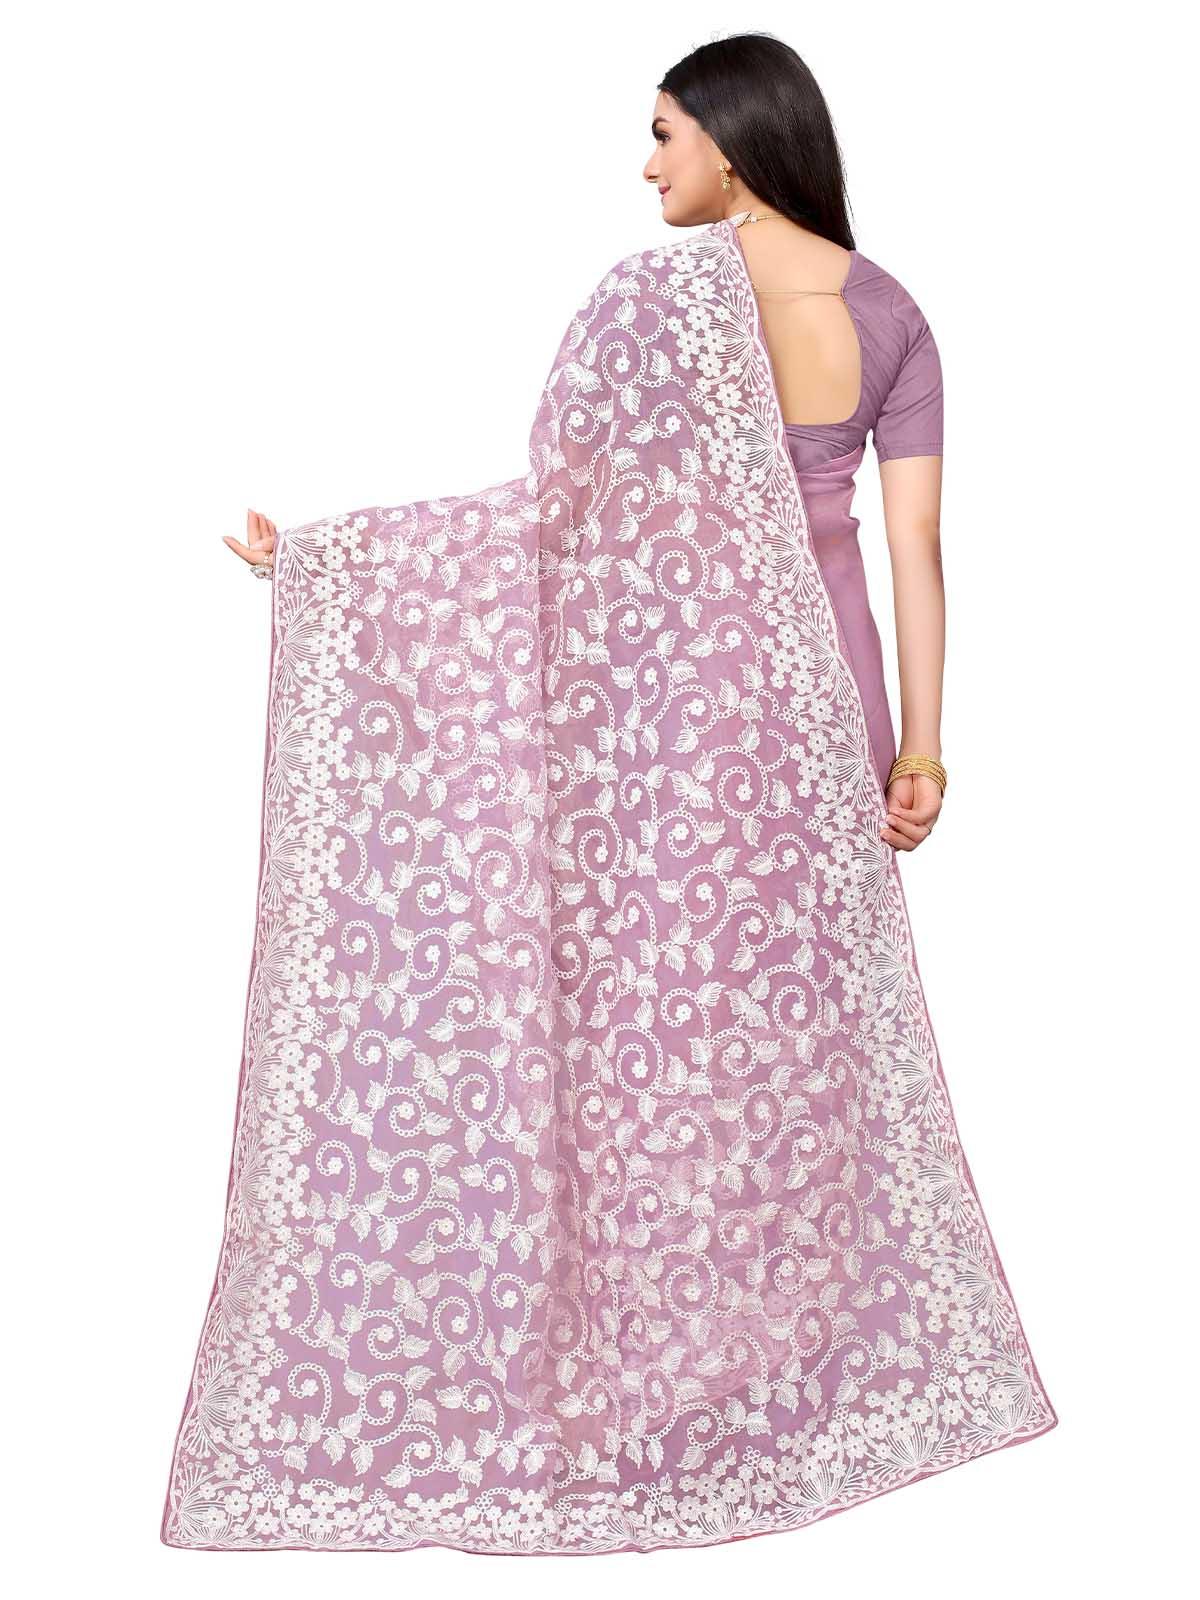 Women's Lilac Organza Embroidered Saree With Blouse - Odette